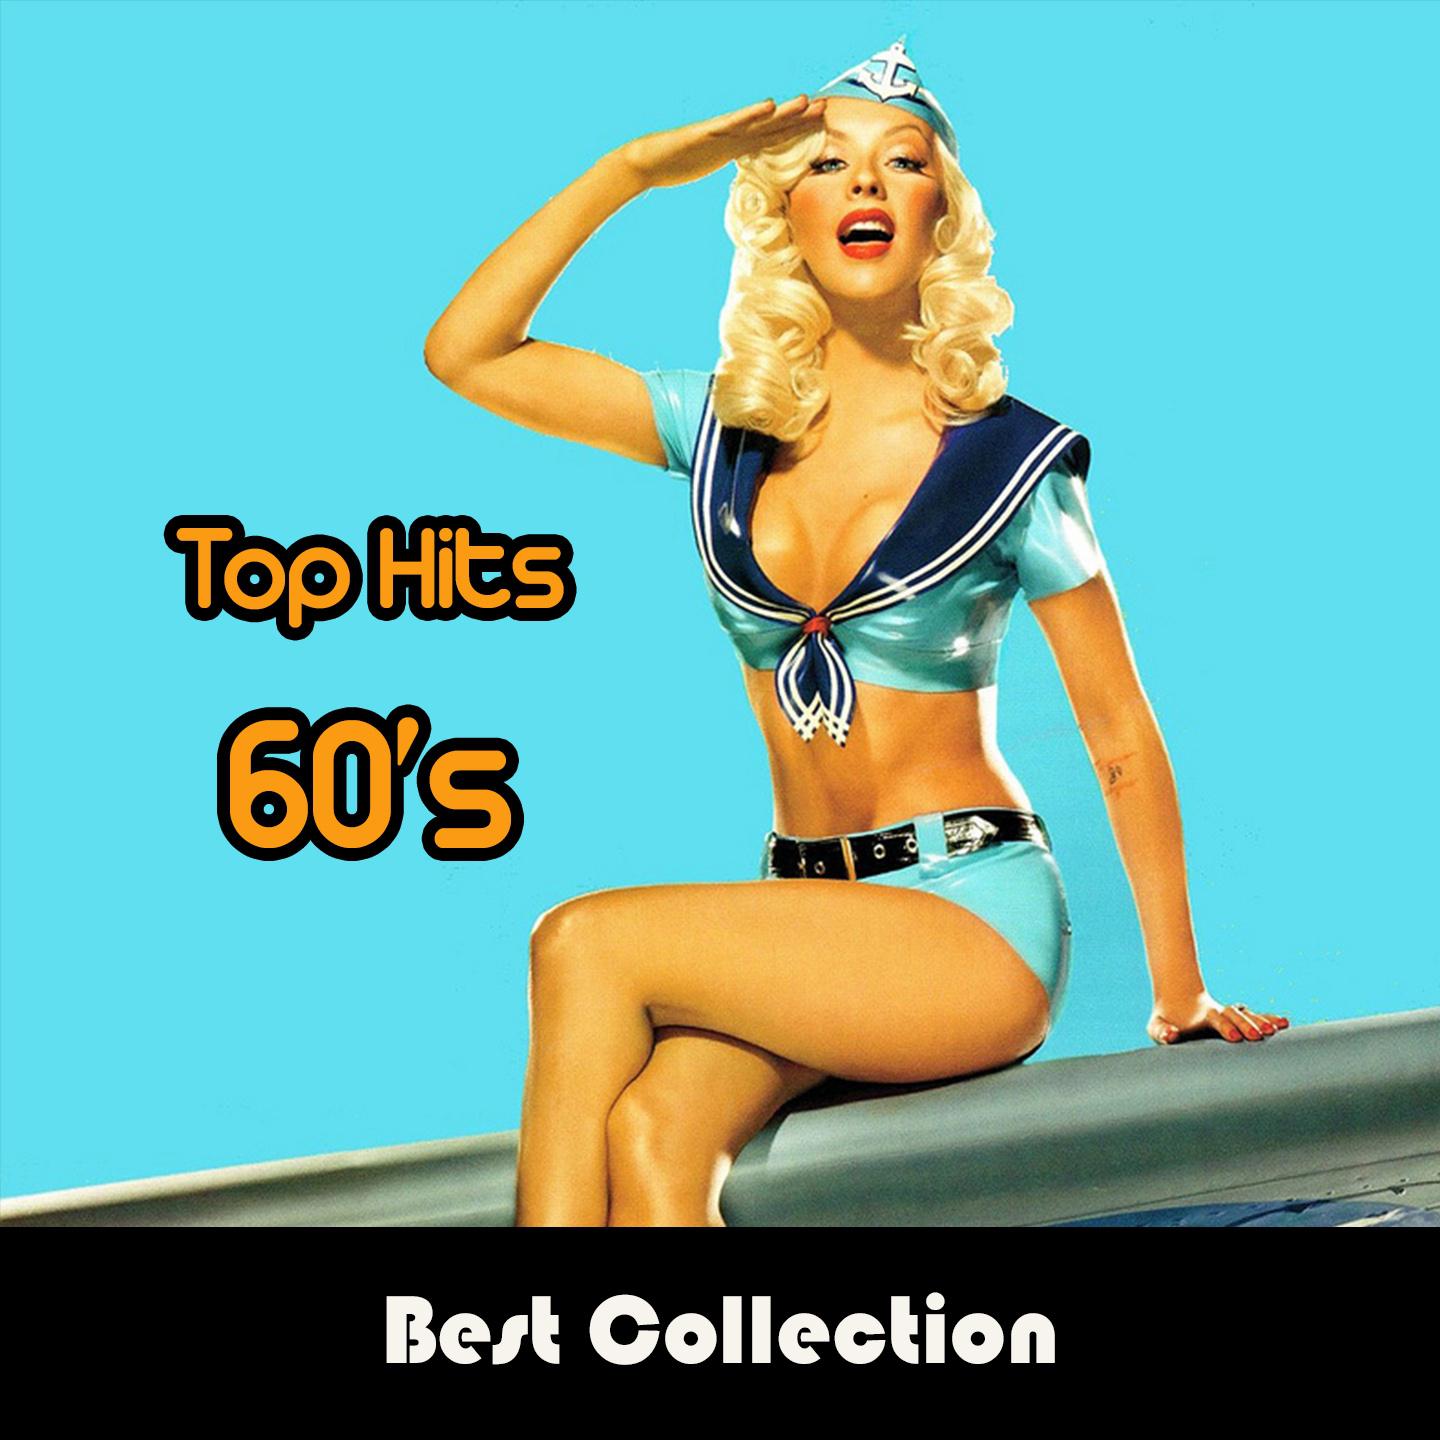 Top Hits 60's (Best Collection)